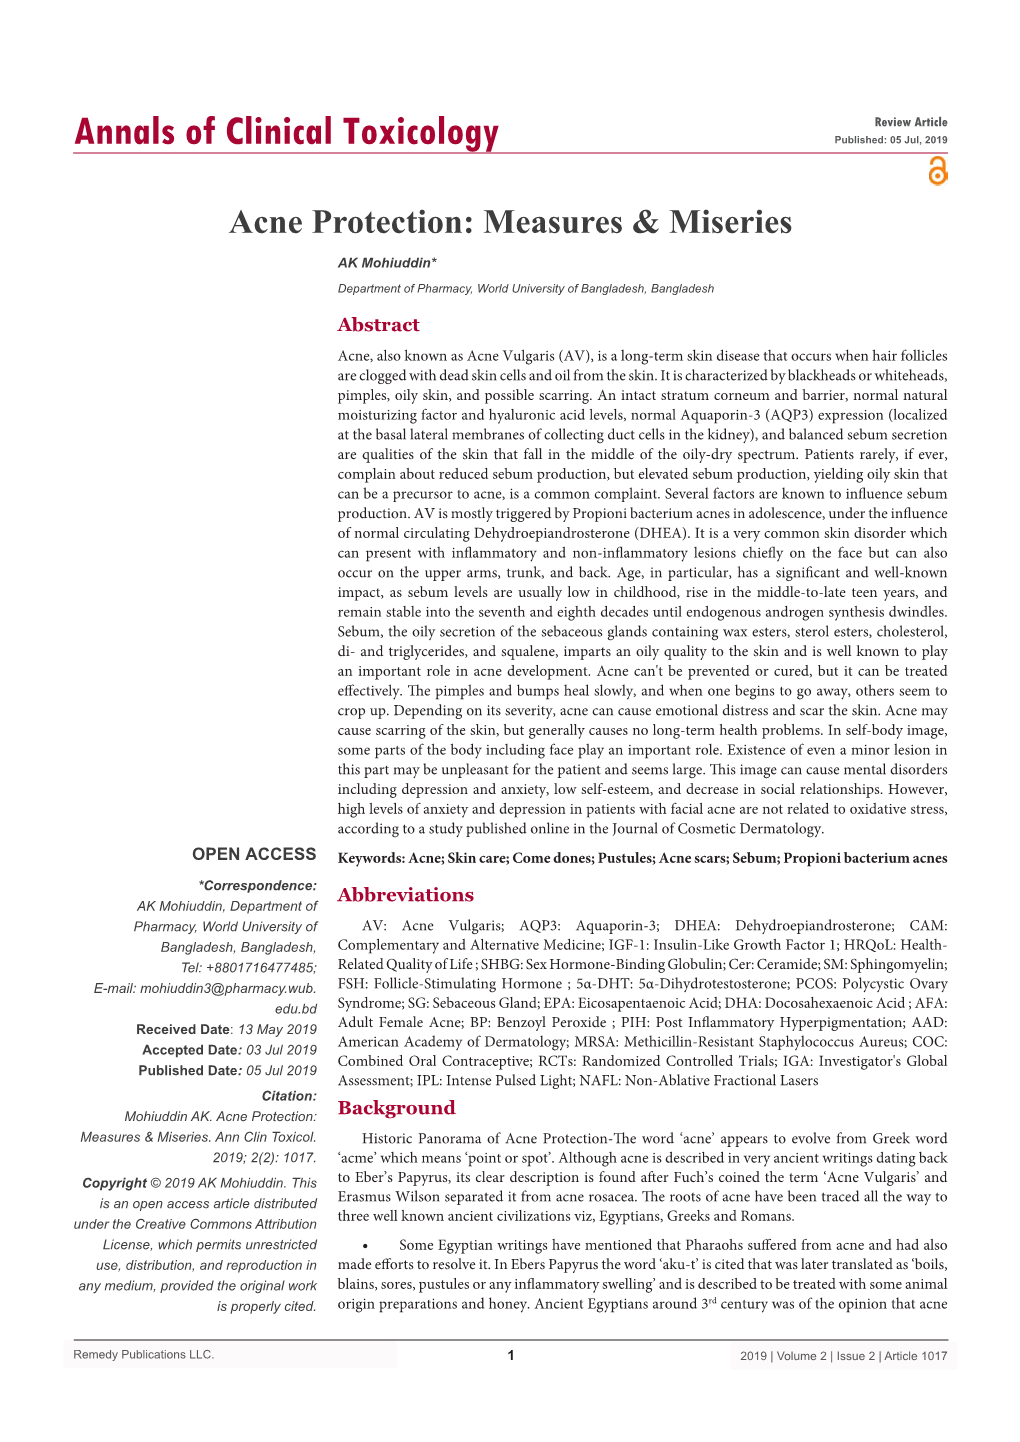 Acne Protection: Measures & Miseries